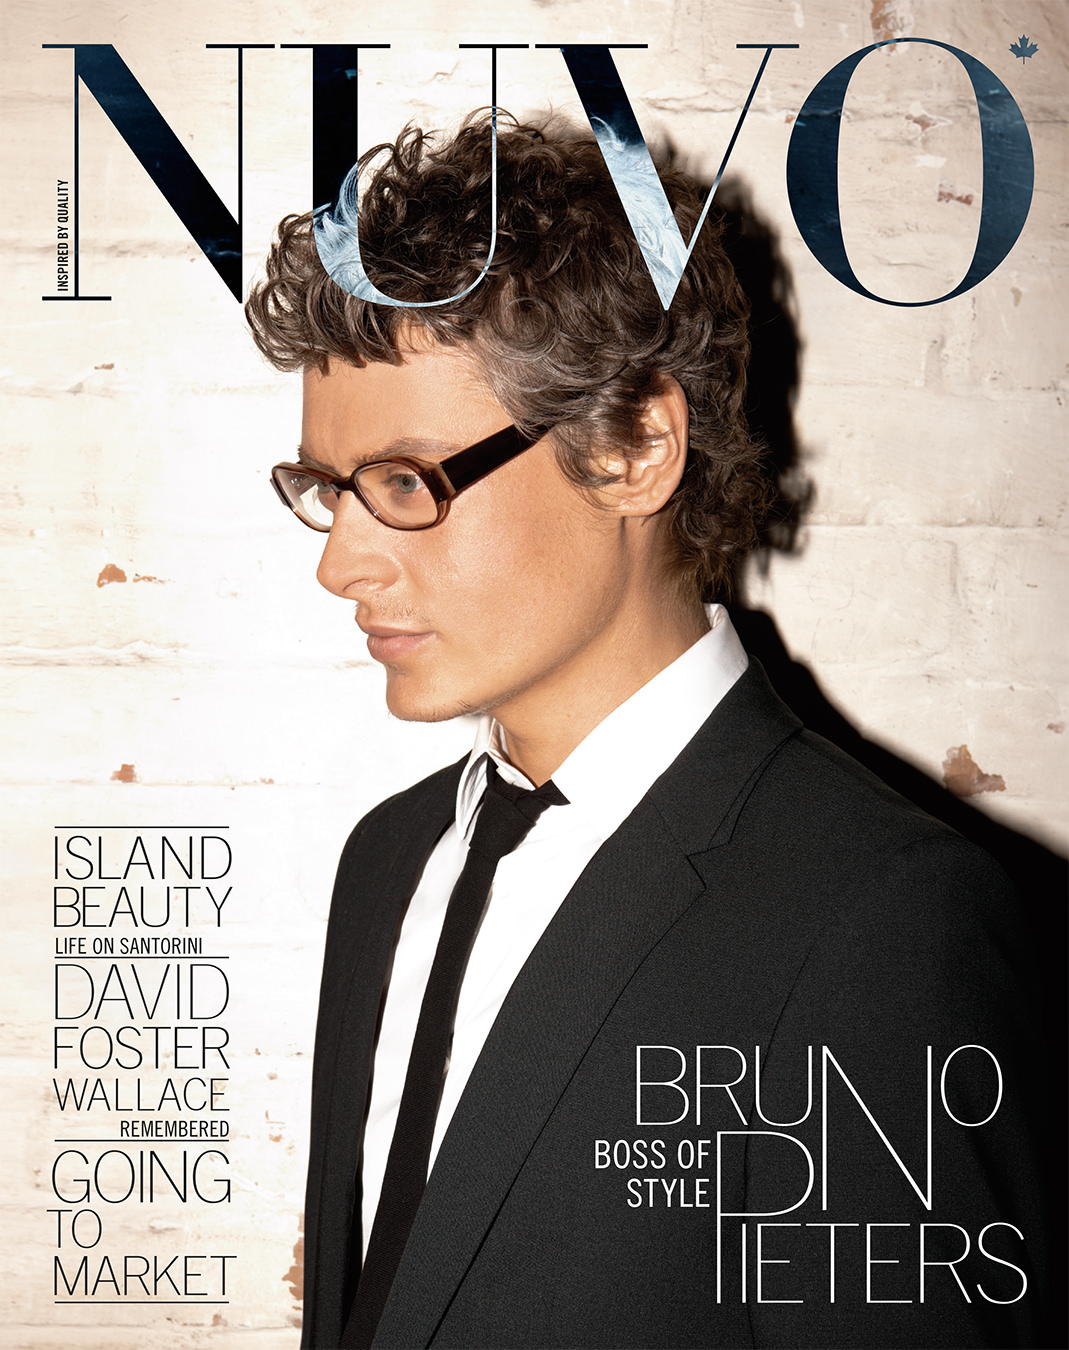 NUVO Magazine Spring 2009 Cover featuring Bruno Pieters